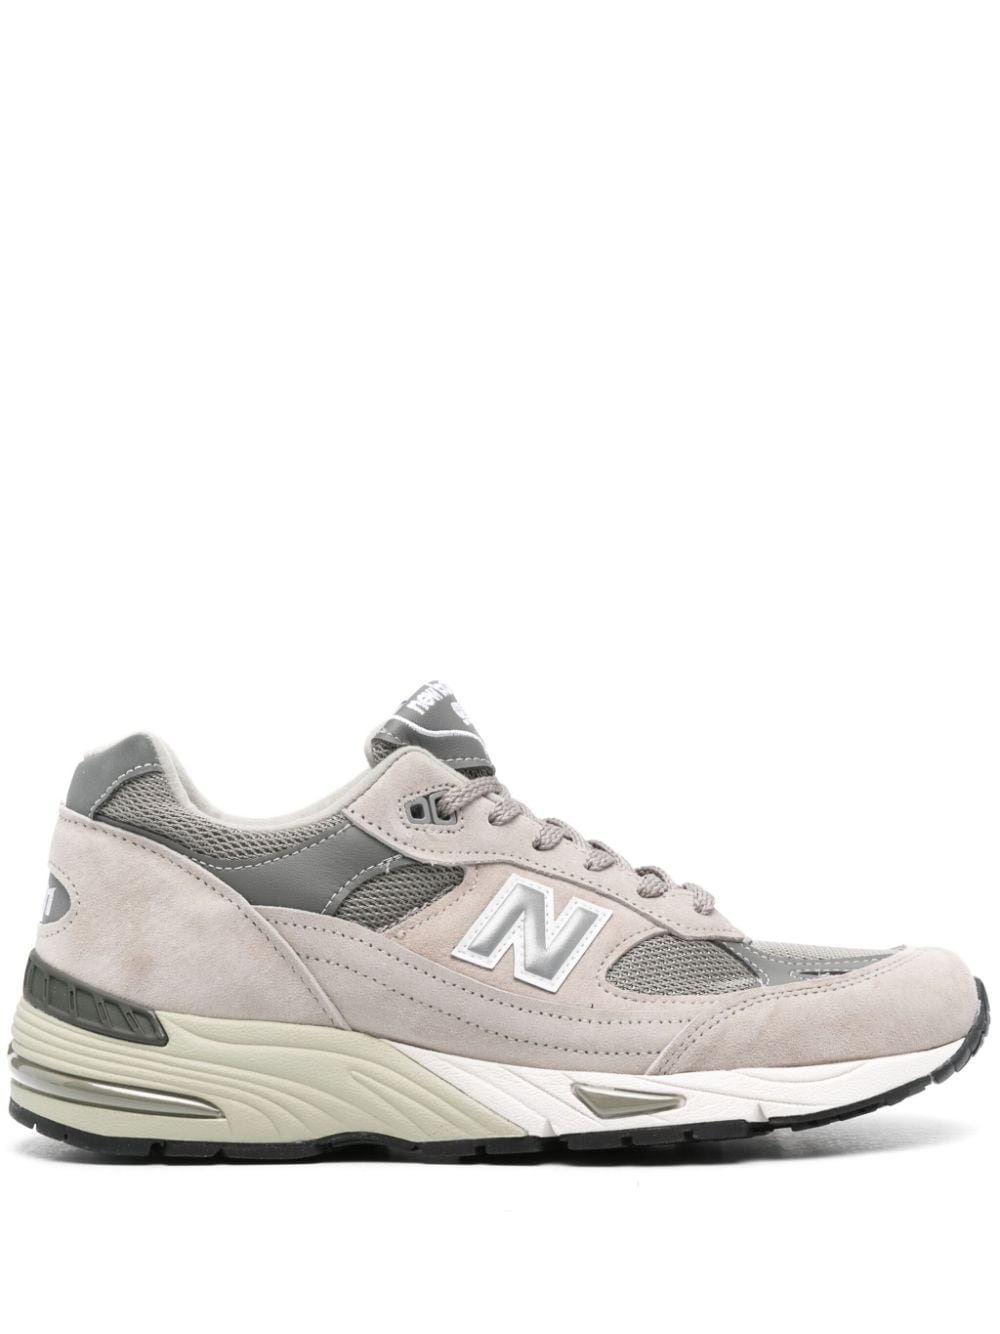 New Balance 991v1 lace-up sneakers - Grey von New Balance